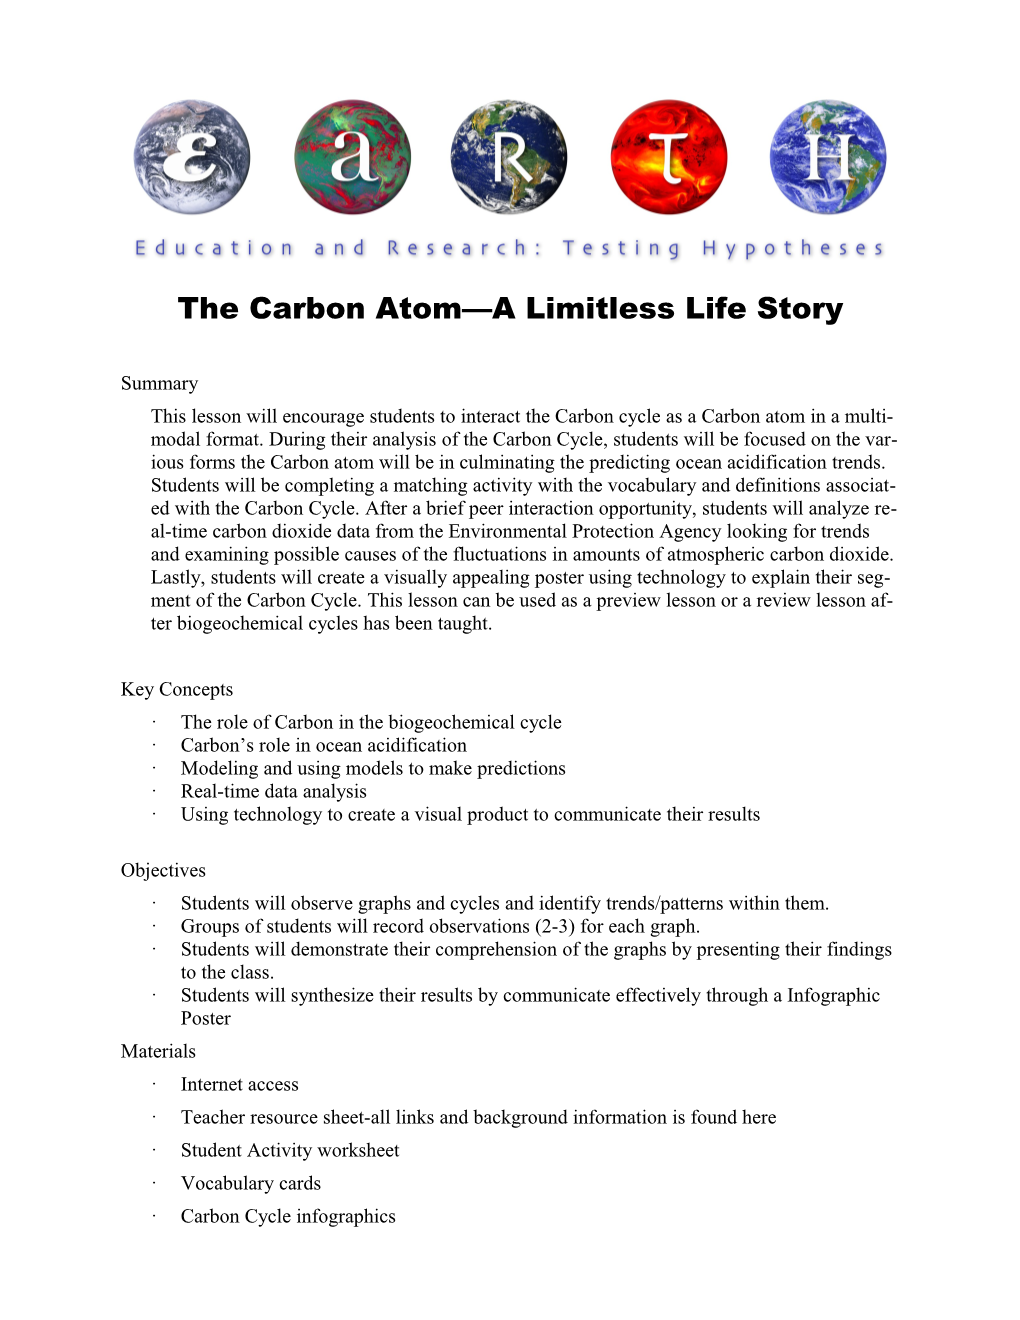 The Carbon Atom a Limitless Life Story